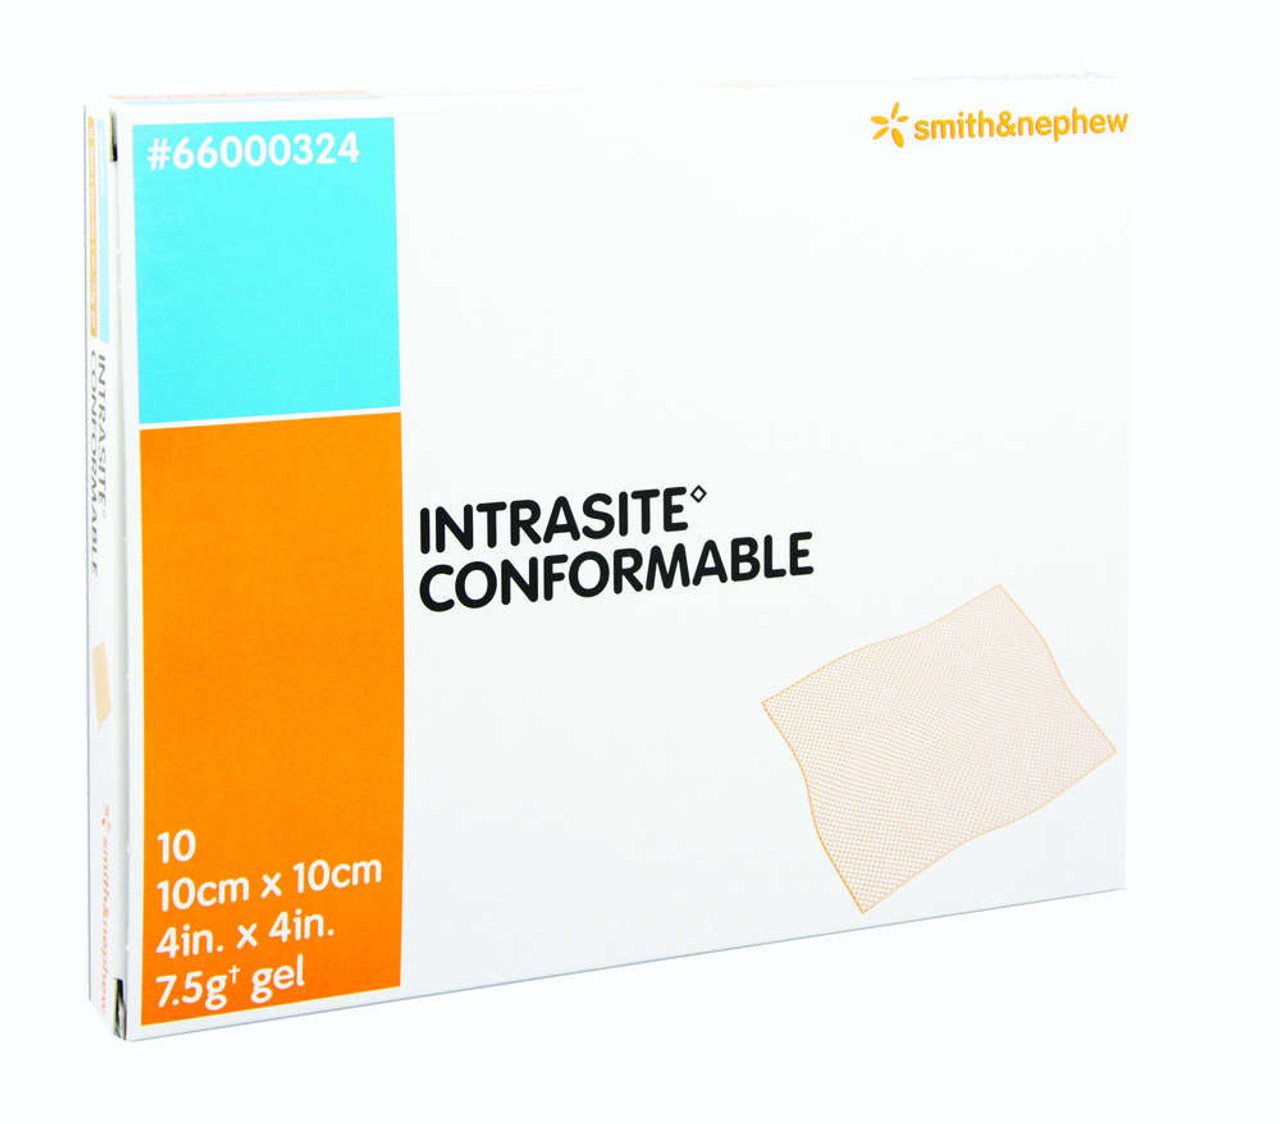 INTRASITE CONFORMABLE HYDROGEL Dressing, SIZE 10CM X 10CM BX/10